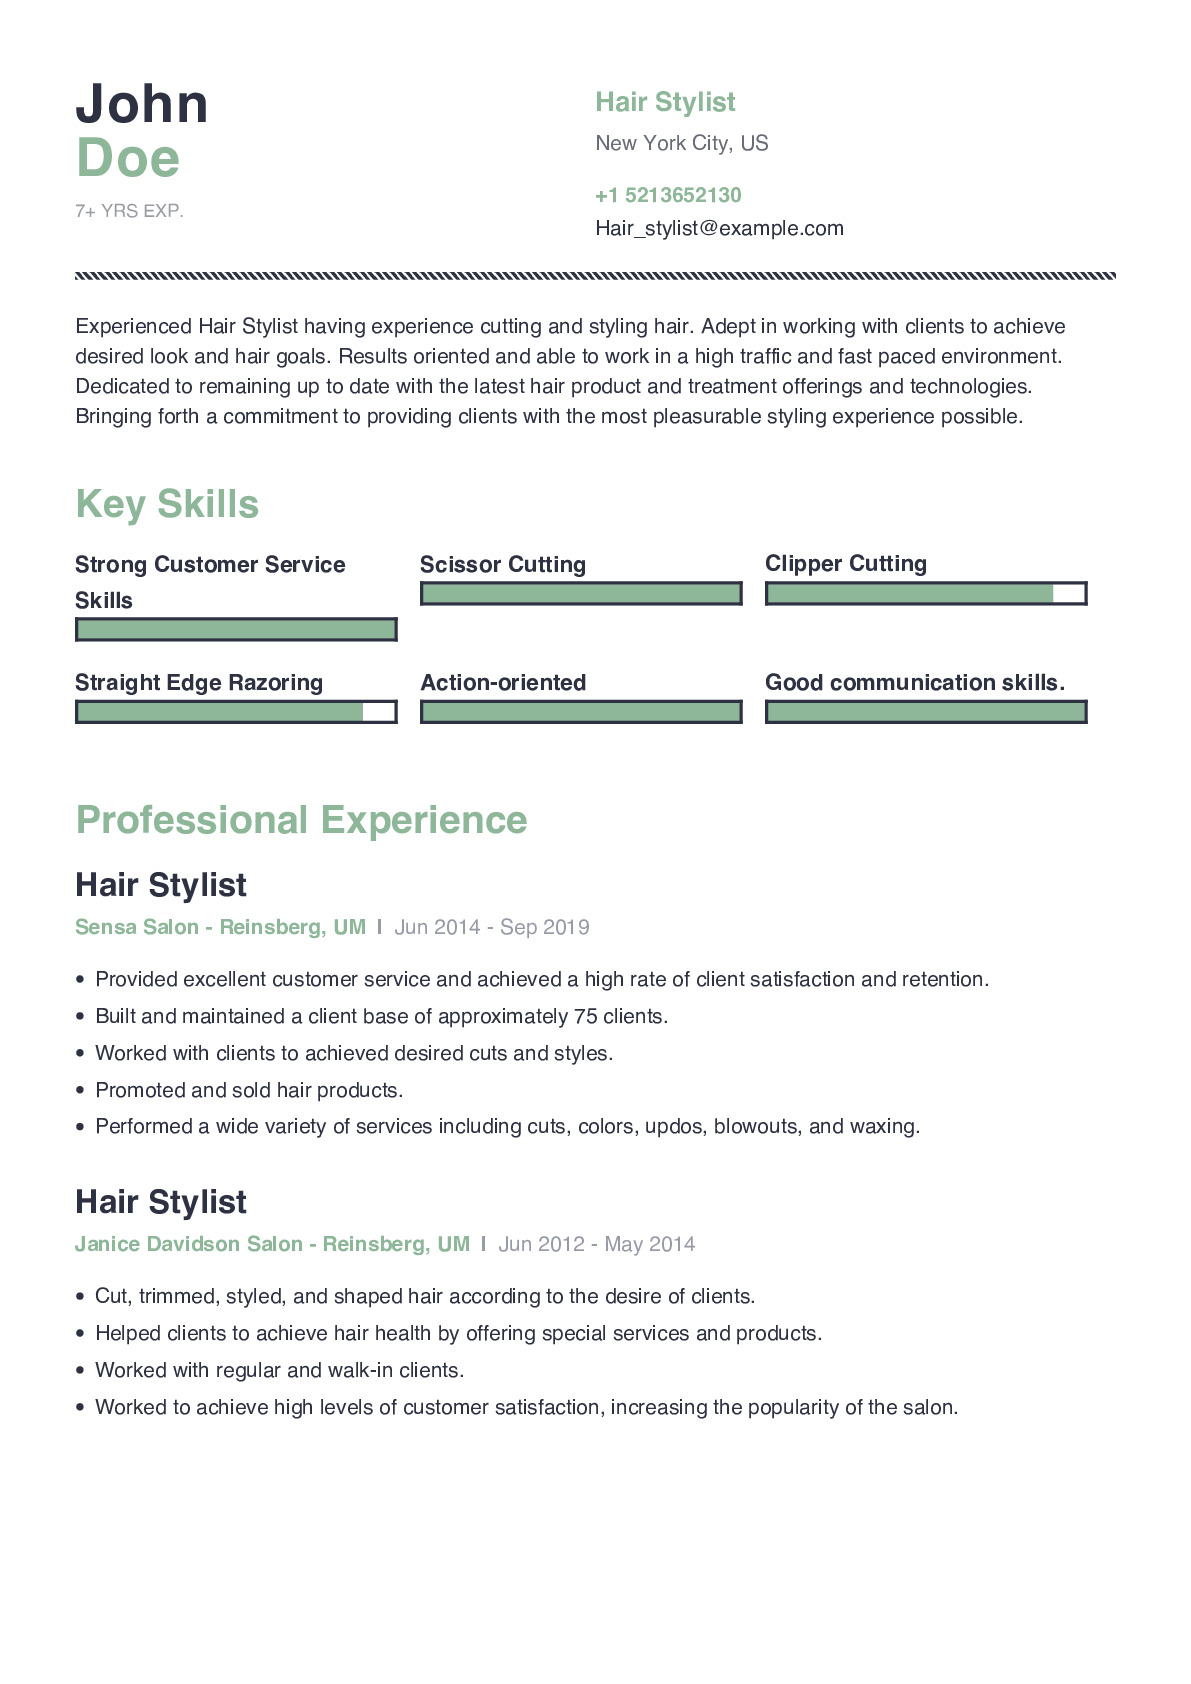 Hair Stylist Resume Example With Content Sample | CraftmyCV